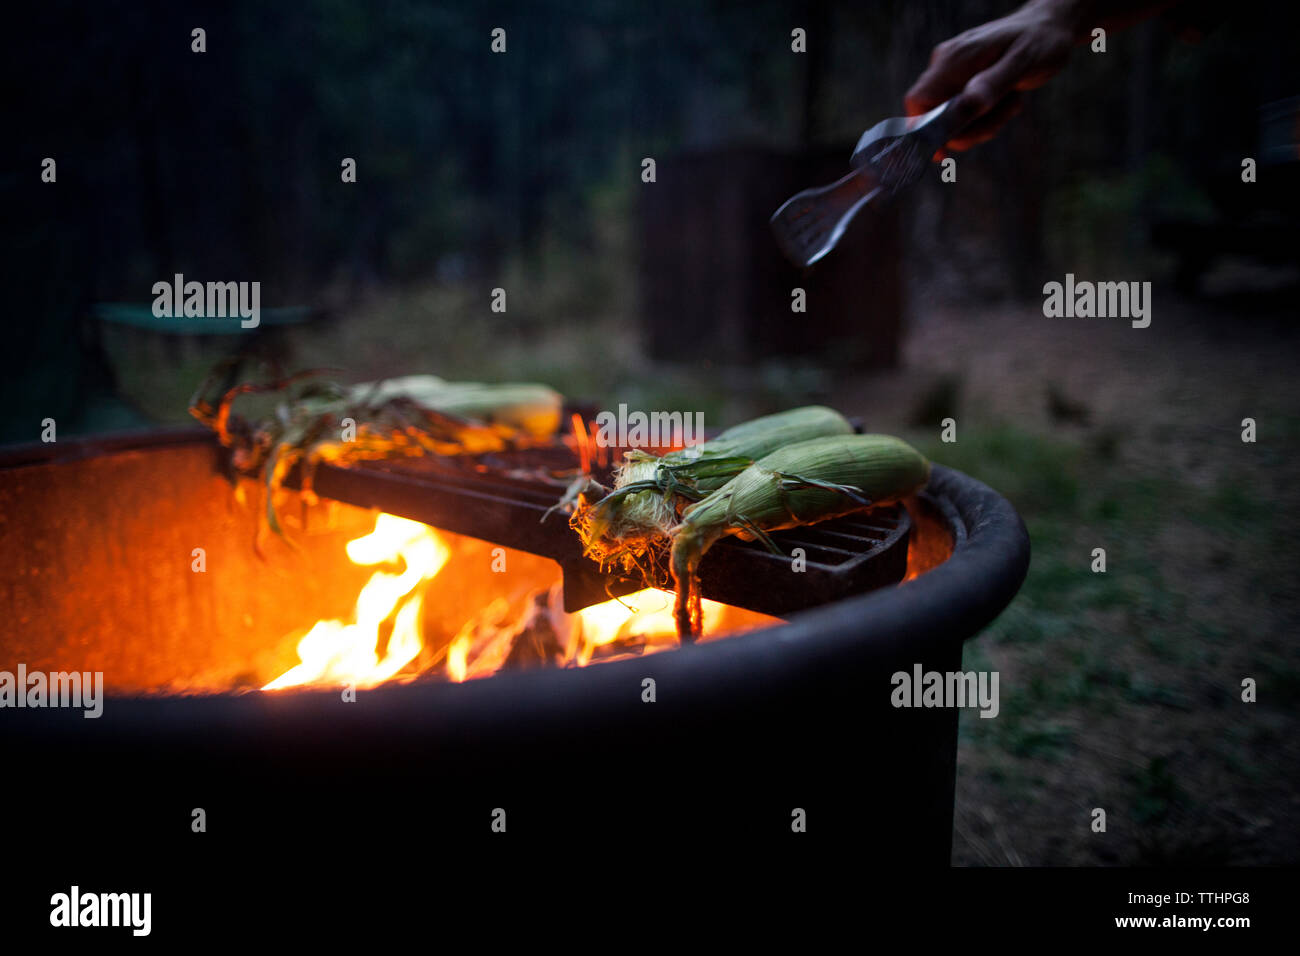 Cropped image of man holding serving tongs while preparing corns on fire pit Stock Photo